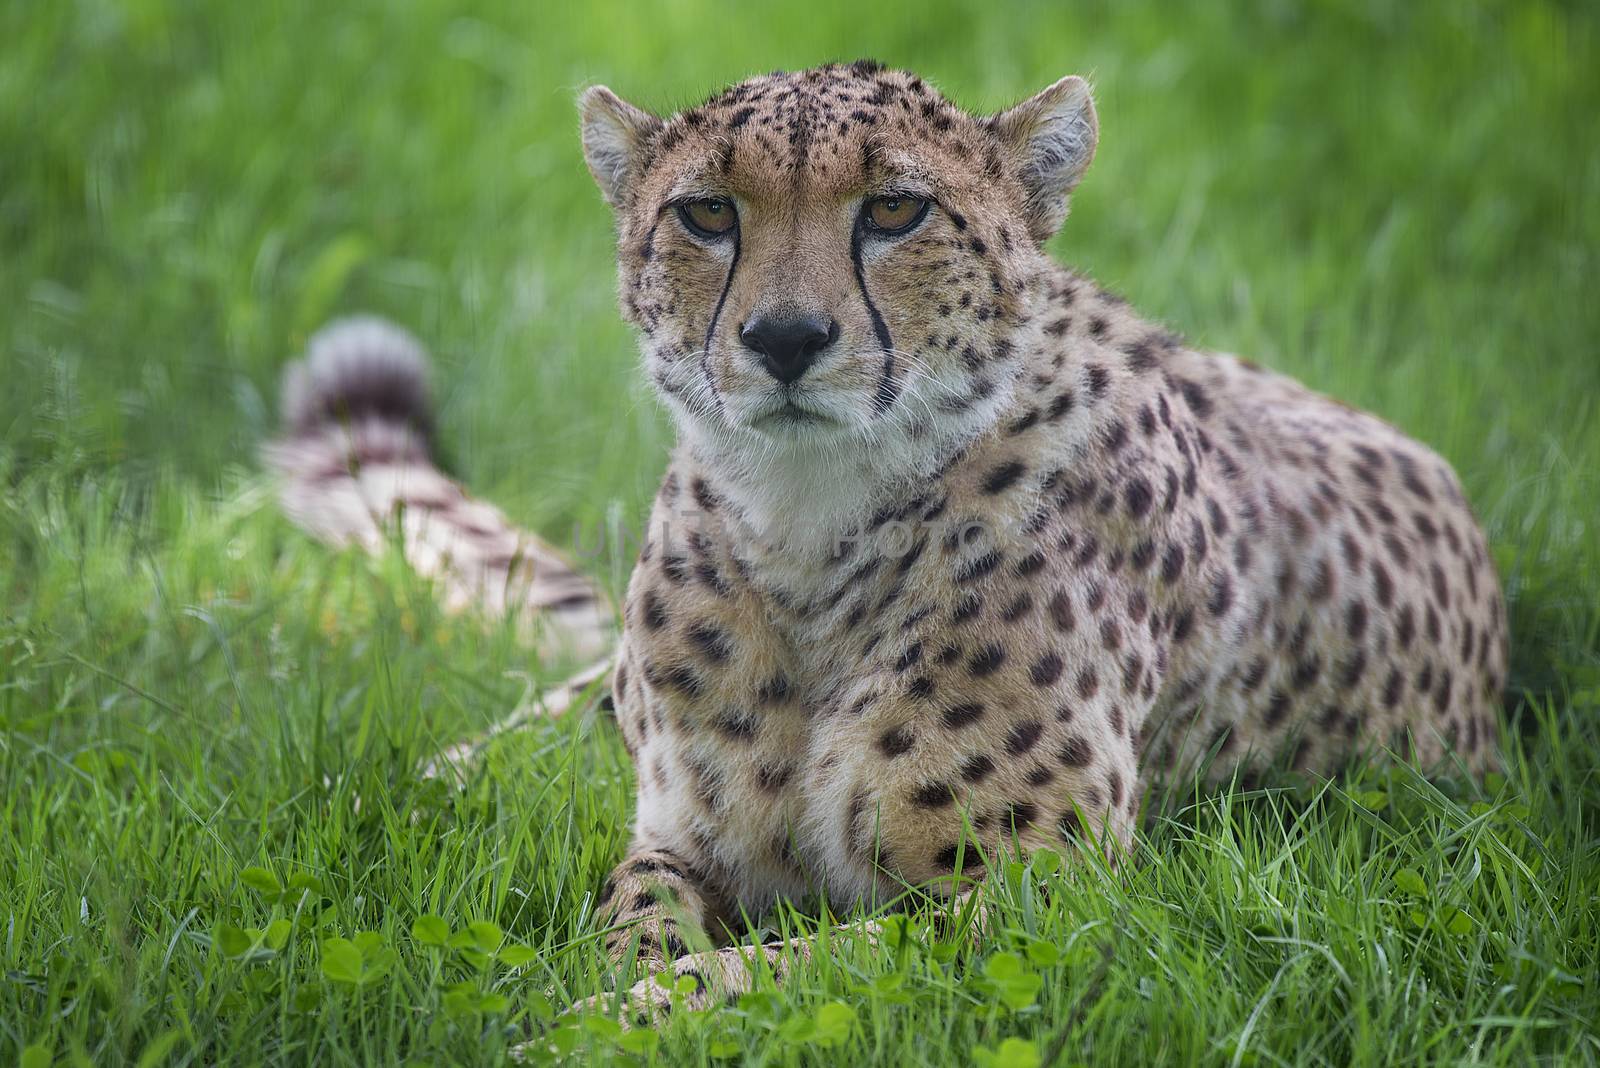 a close up photograph of a cheetah lying down on the grass staring forward